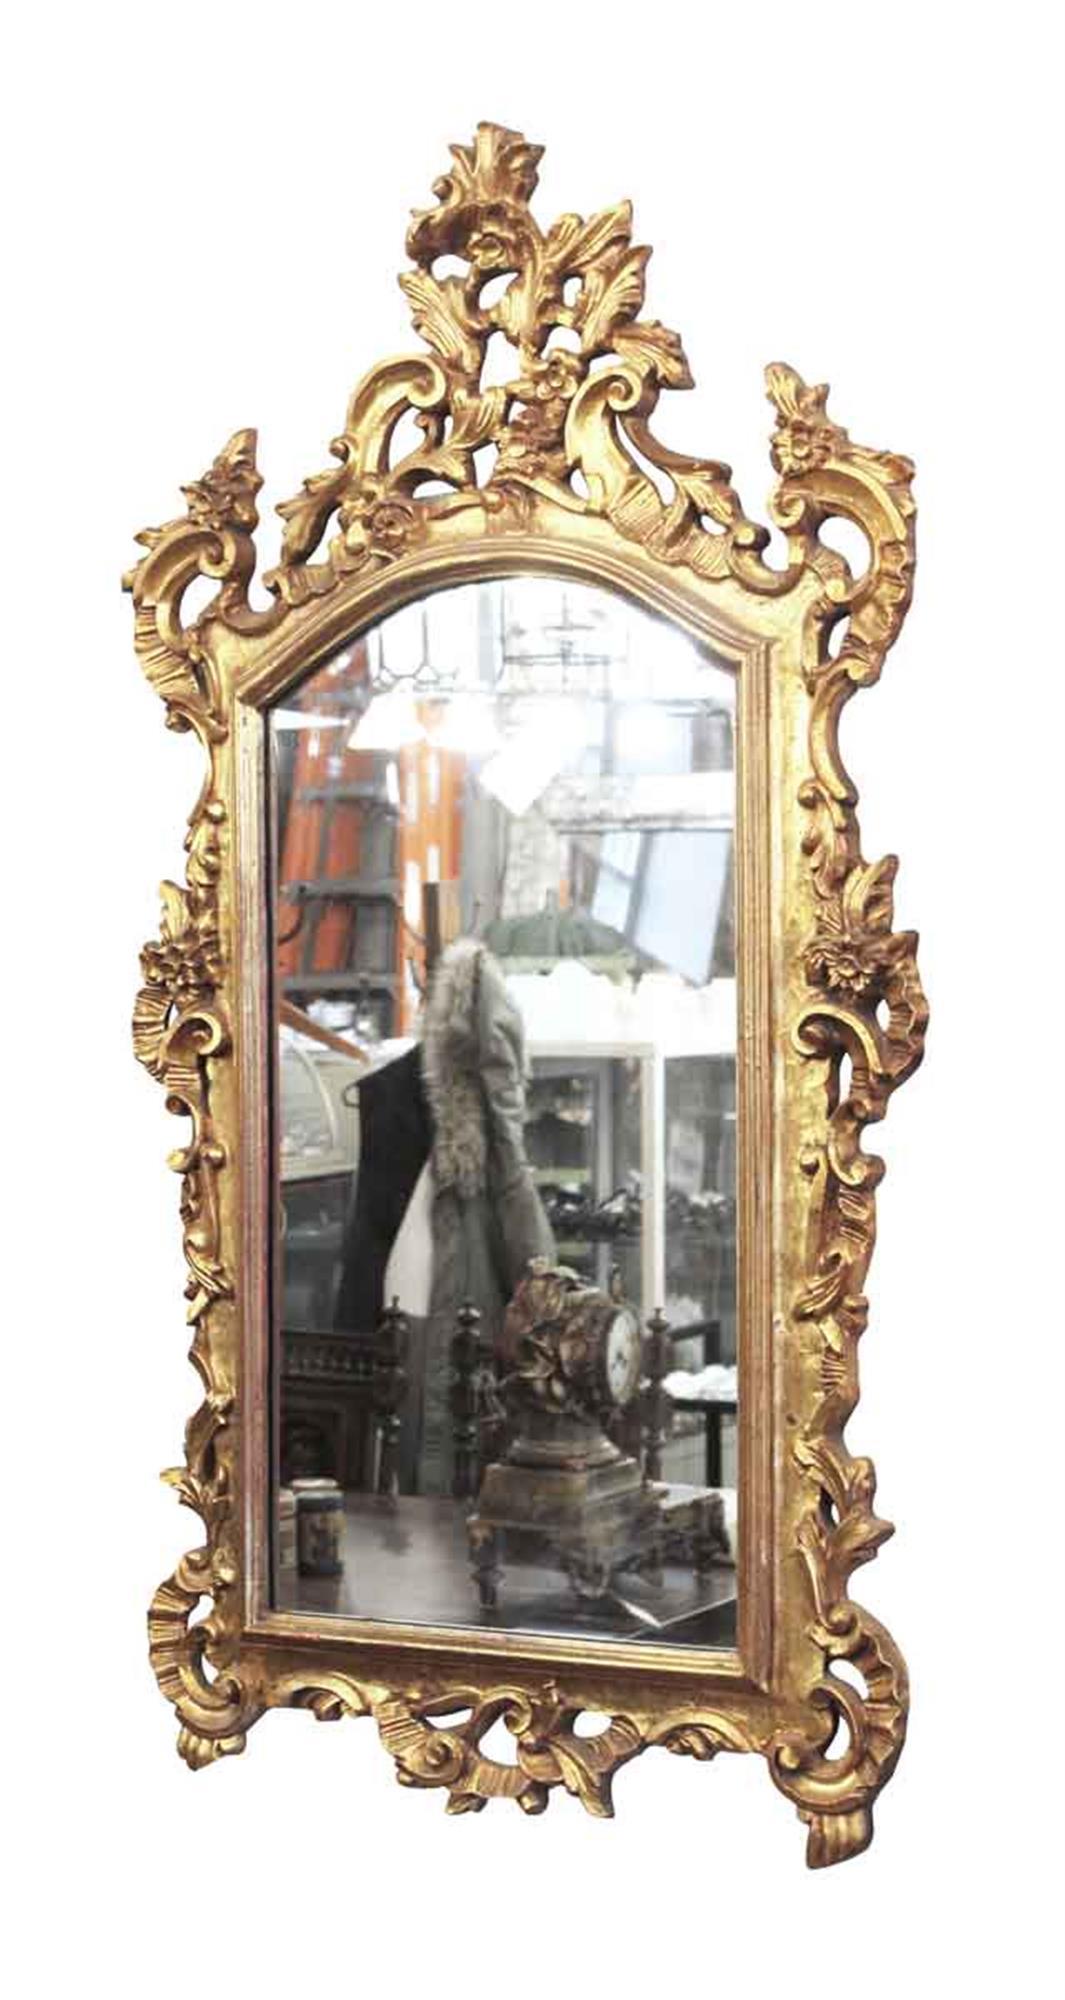 Gold giltwood highly ornate carved wall mount mirror. French 1910s. This can be seen at our 2420 Broadway location on the upper west side in Manhattan.